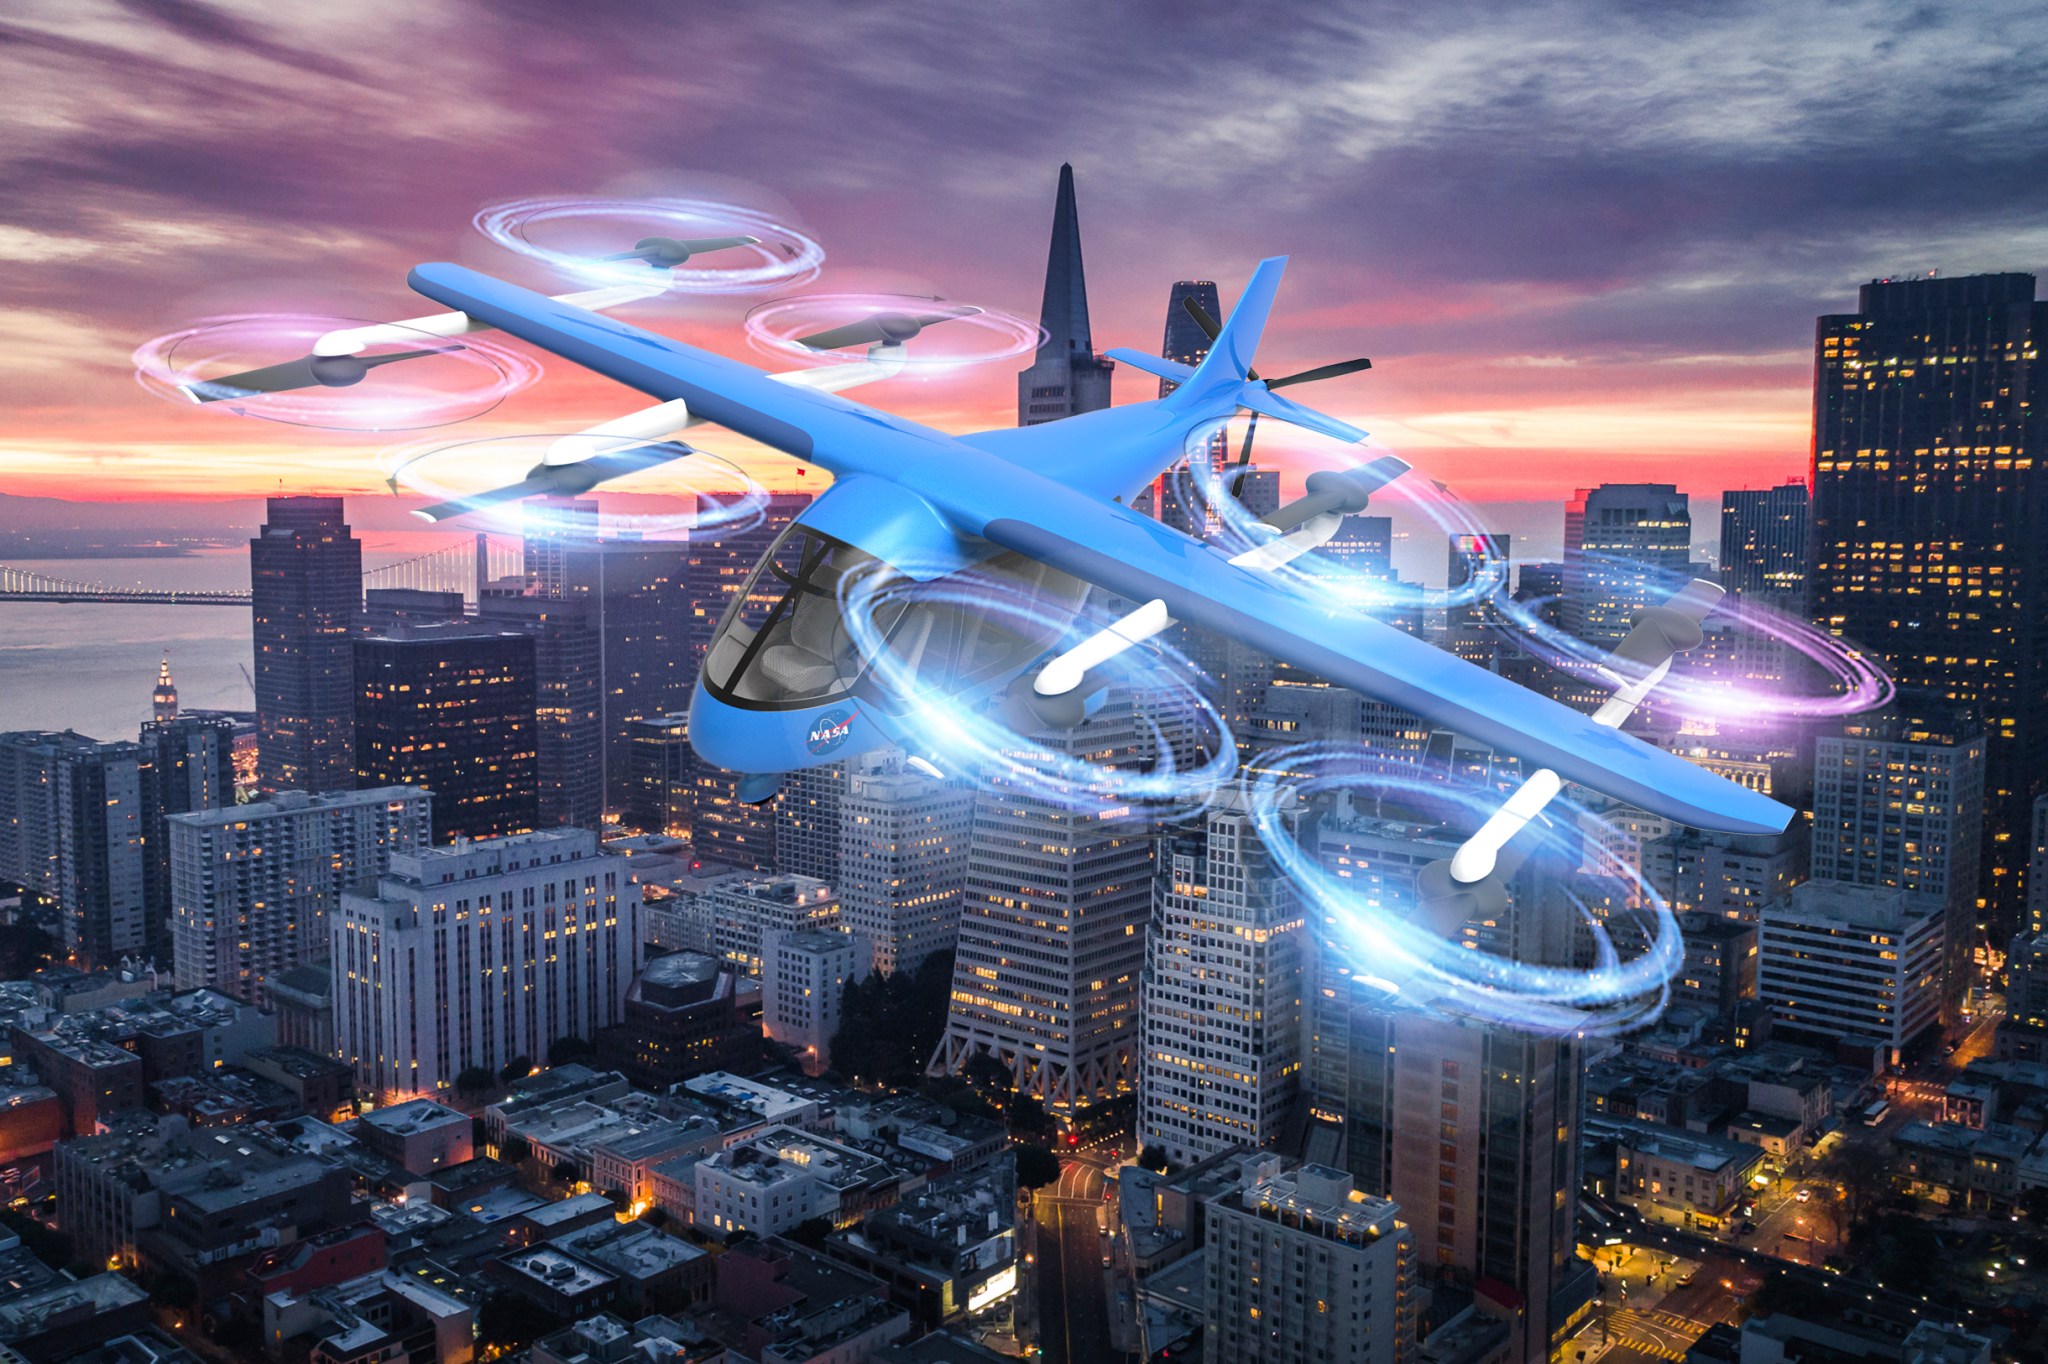 Artist concept of an unmanned aircraft in flight over San Francisco, California.